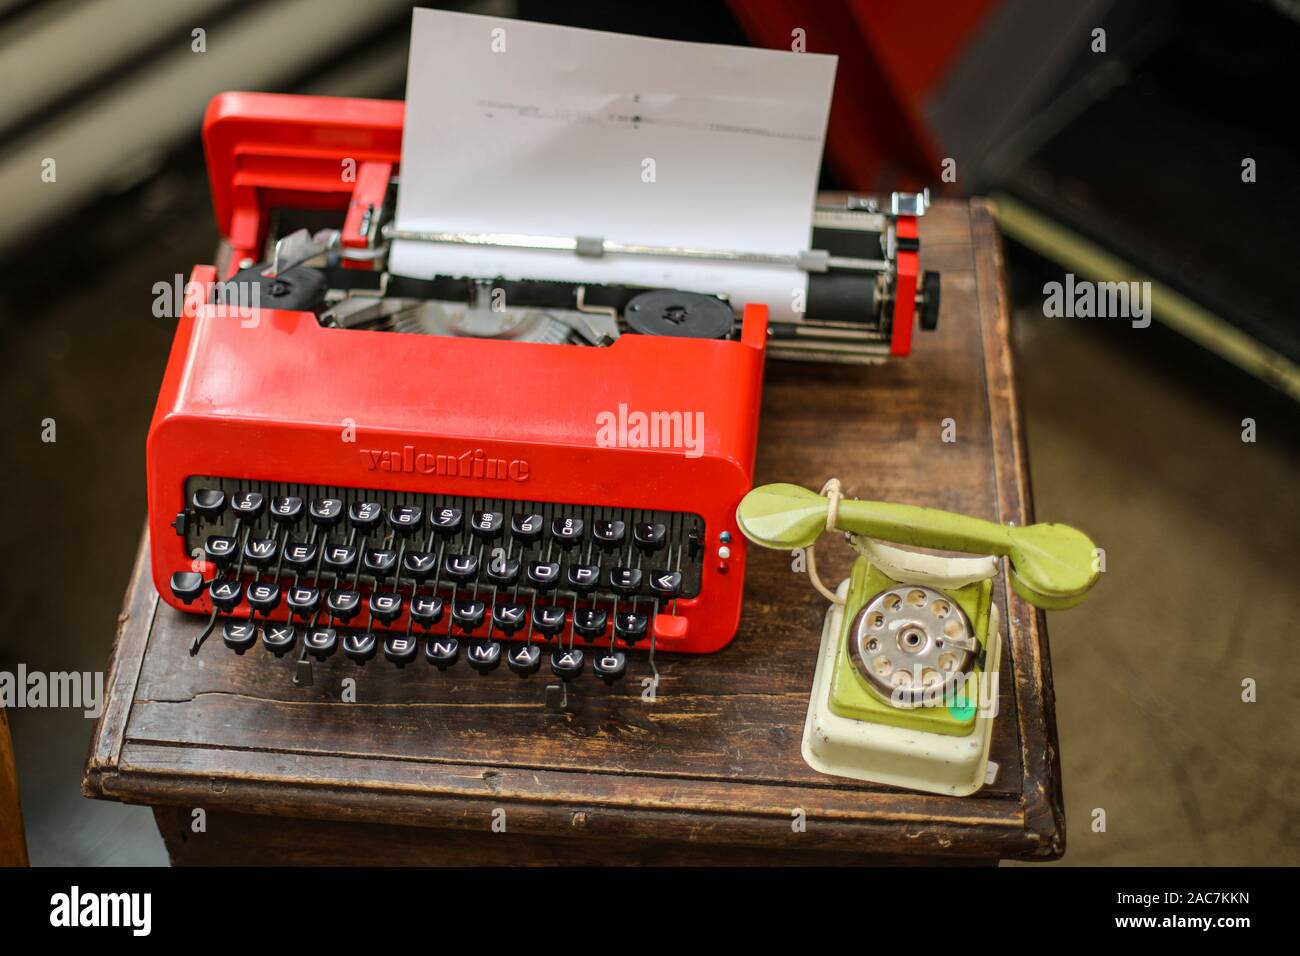 Red plastic manual Valentine typewriter and green tin toy landline phone at Helsinki Retro and Vintage Design Expo Stock Photo